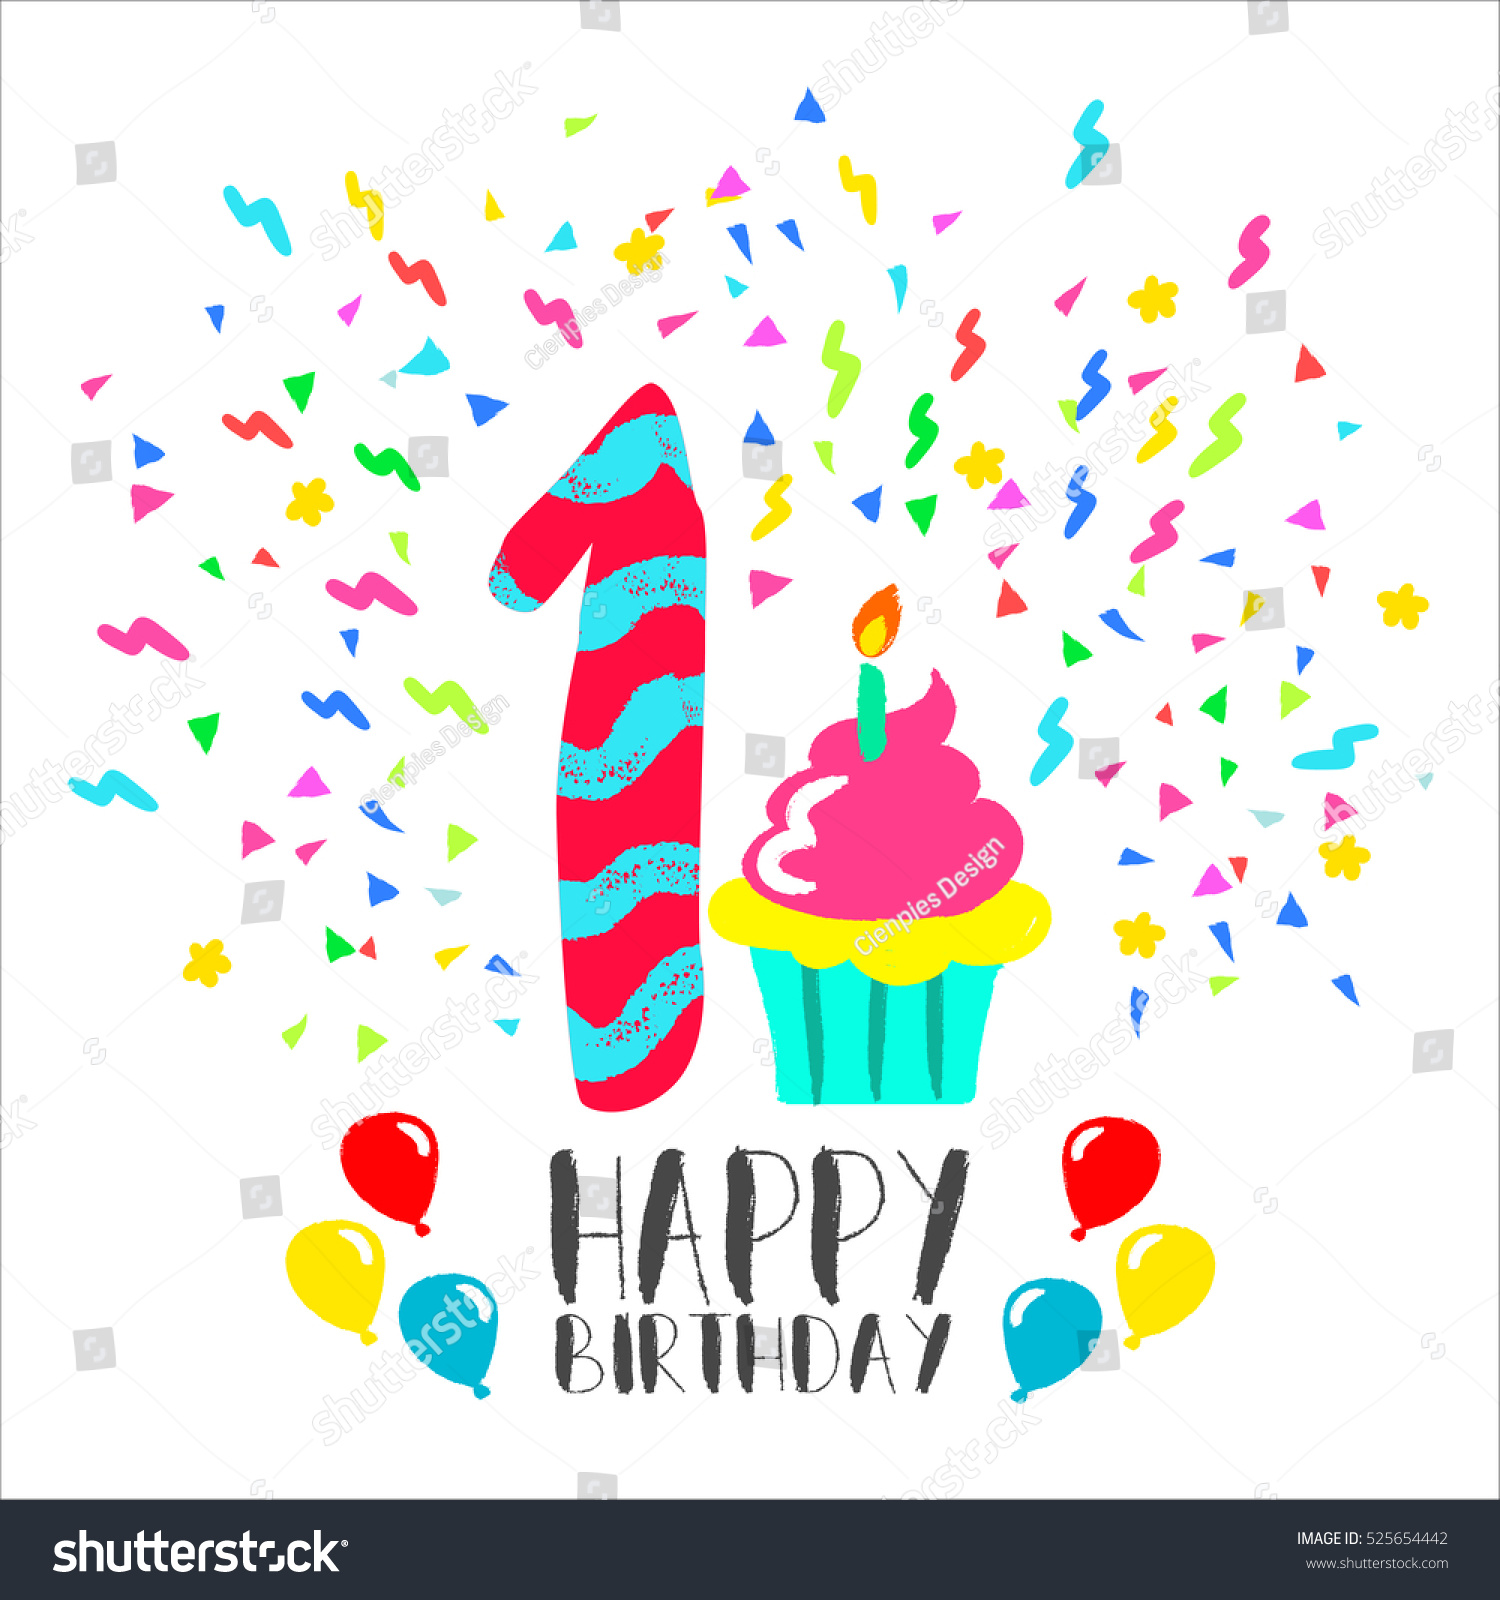 Happy Birthday Number 1 Greeting Card Stock Vector 525654442 - Shutterstock